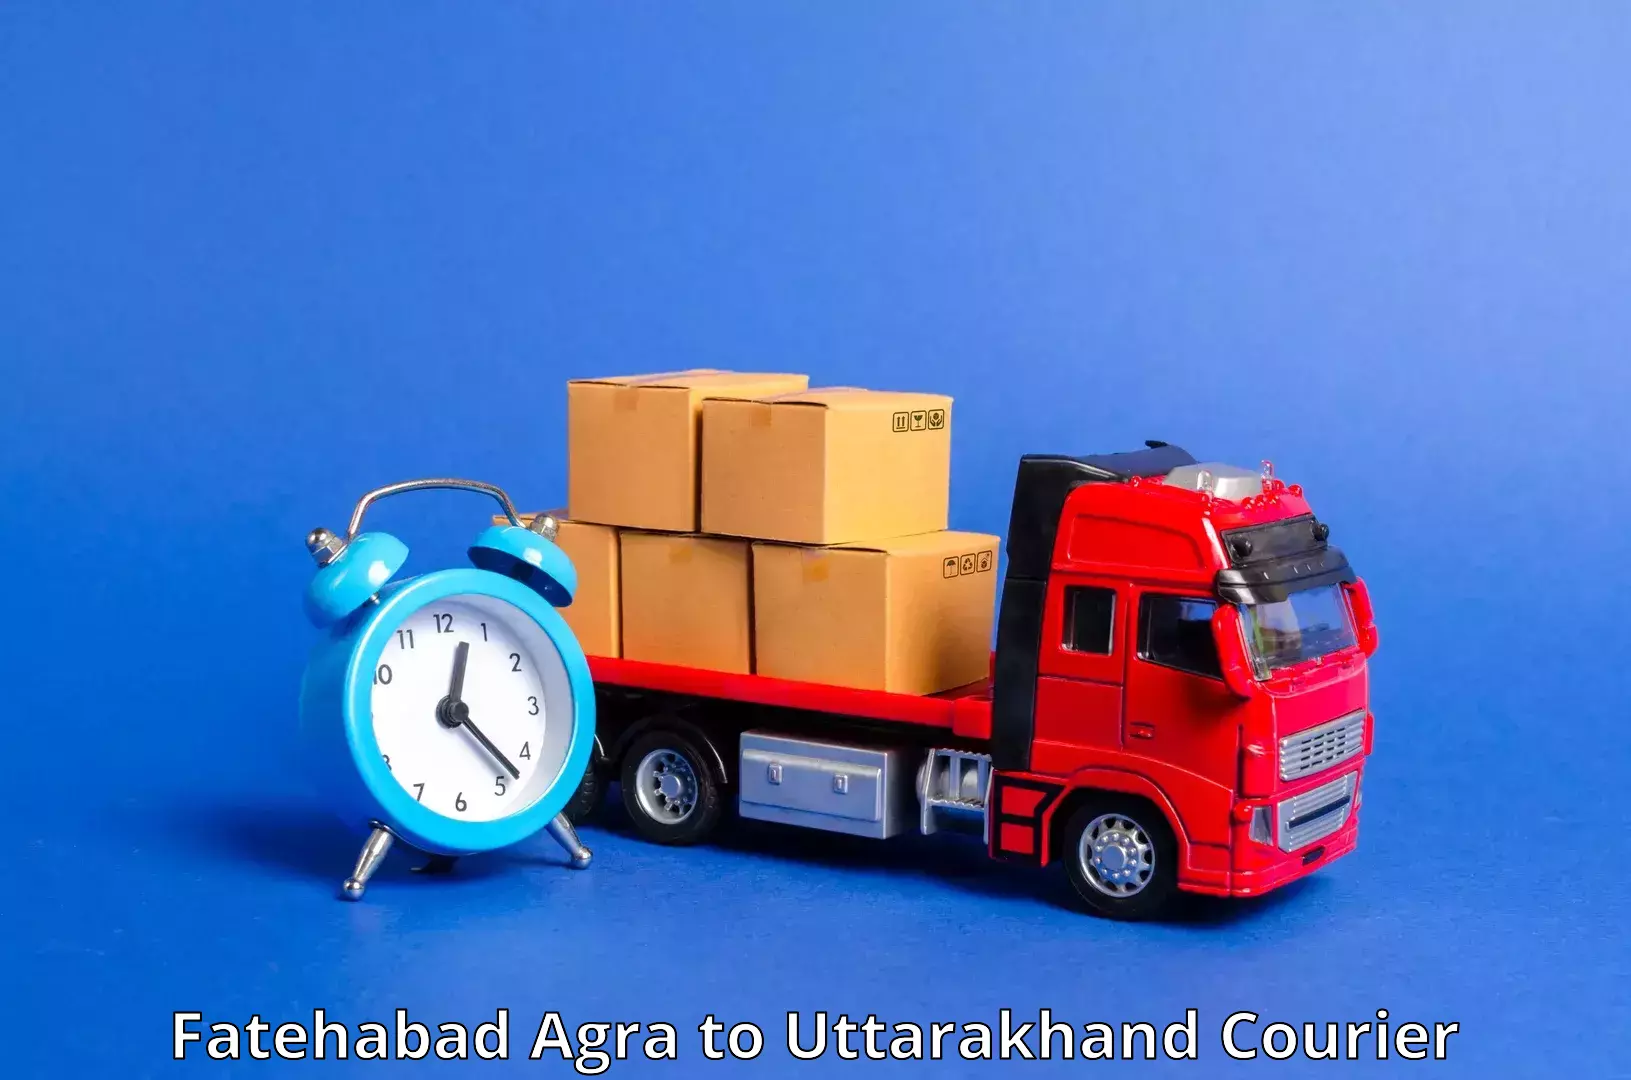 High-speed delivery Fatehabad Agra to Tehri Garhwal